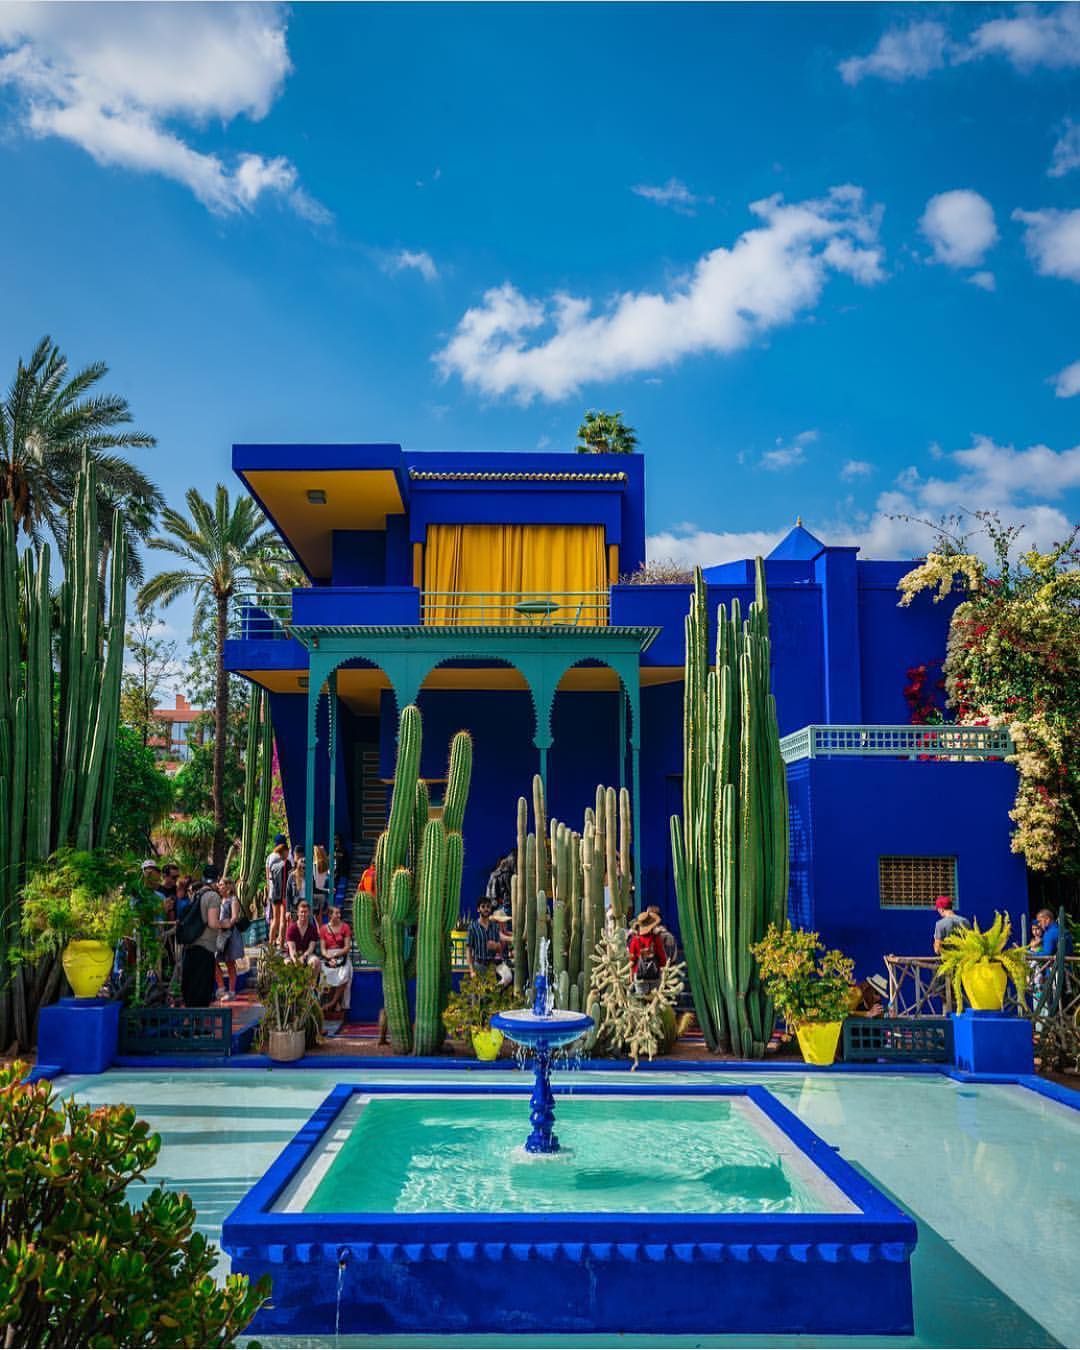 Le Jardin Marrakech Luxe A Little Moroccan Beauty for This Amazing Day ðð¼ðða